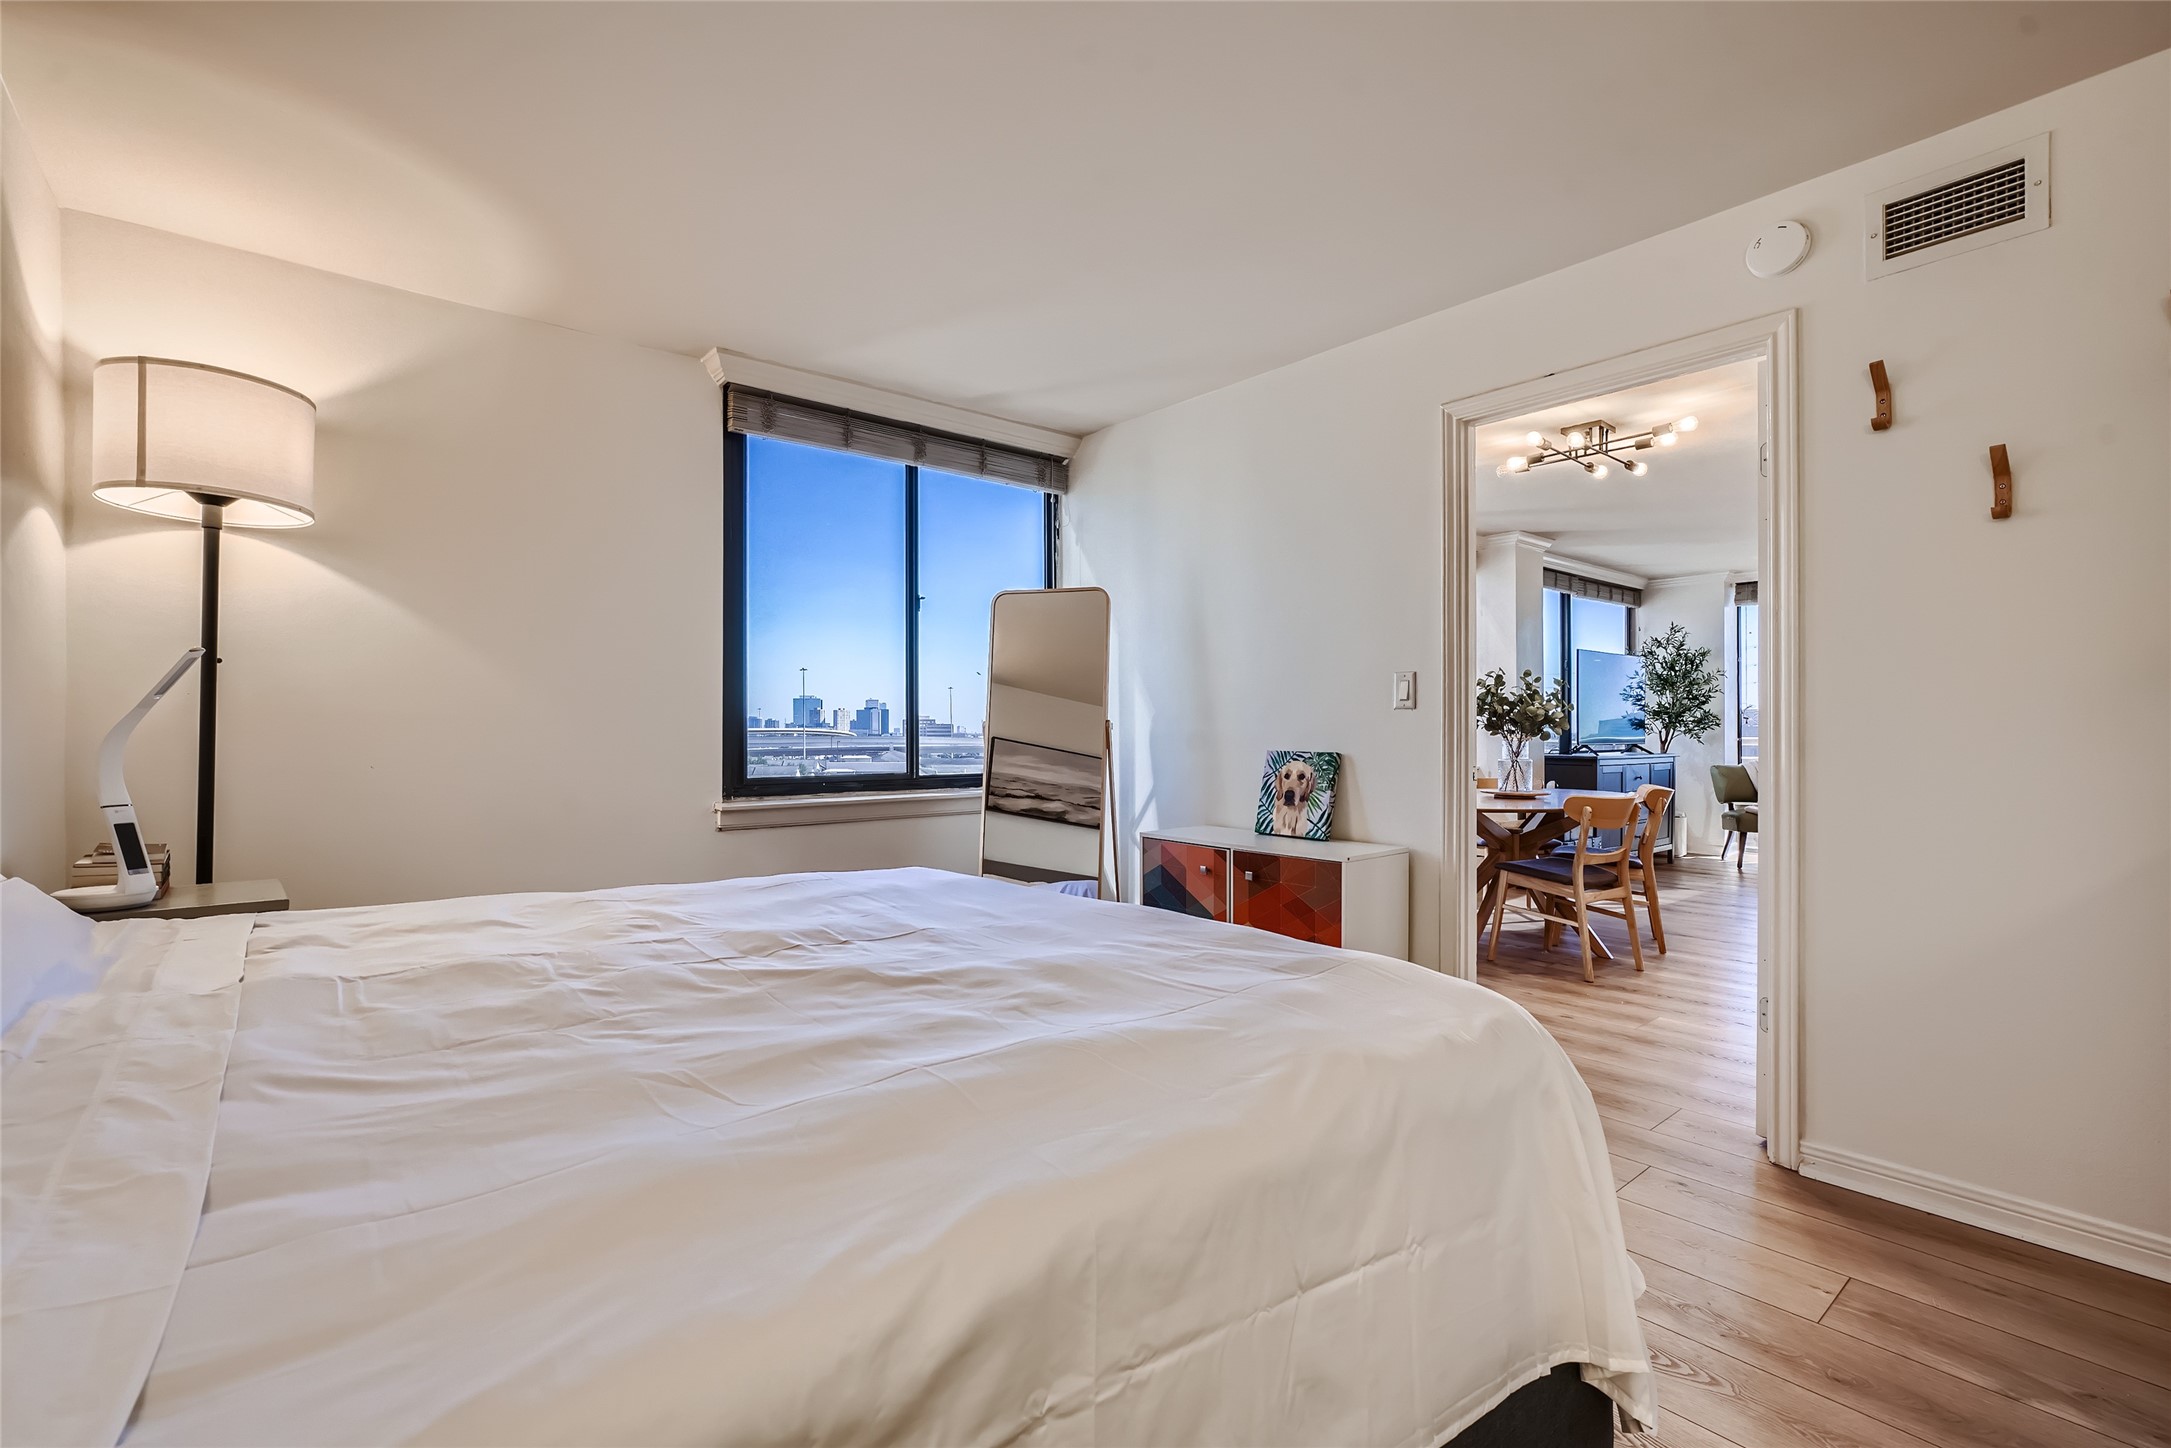 Enjoy the view of Downtown Houston from the primary bedroom.